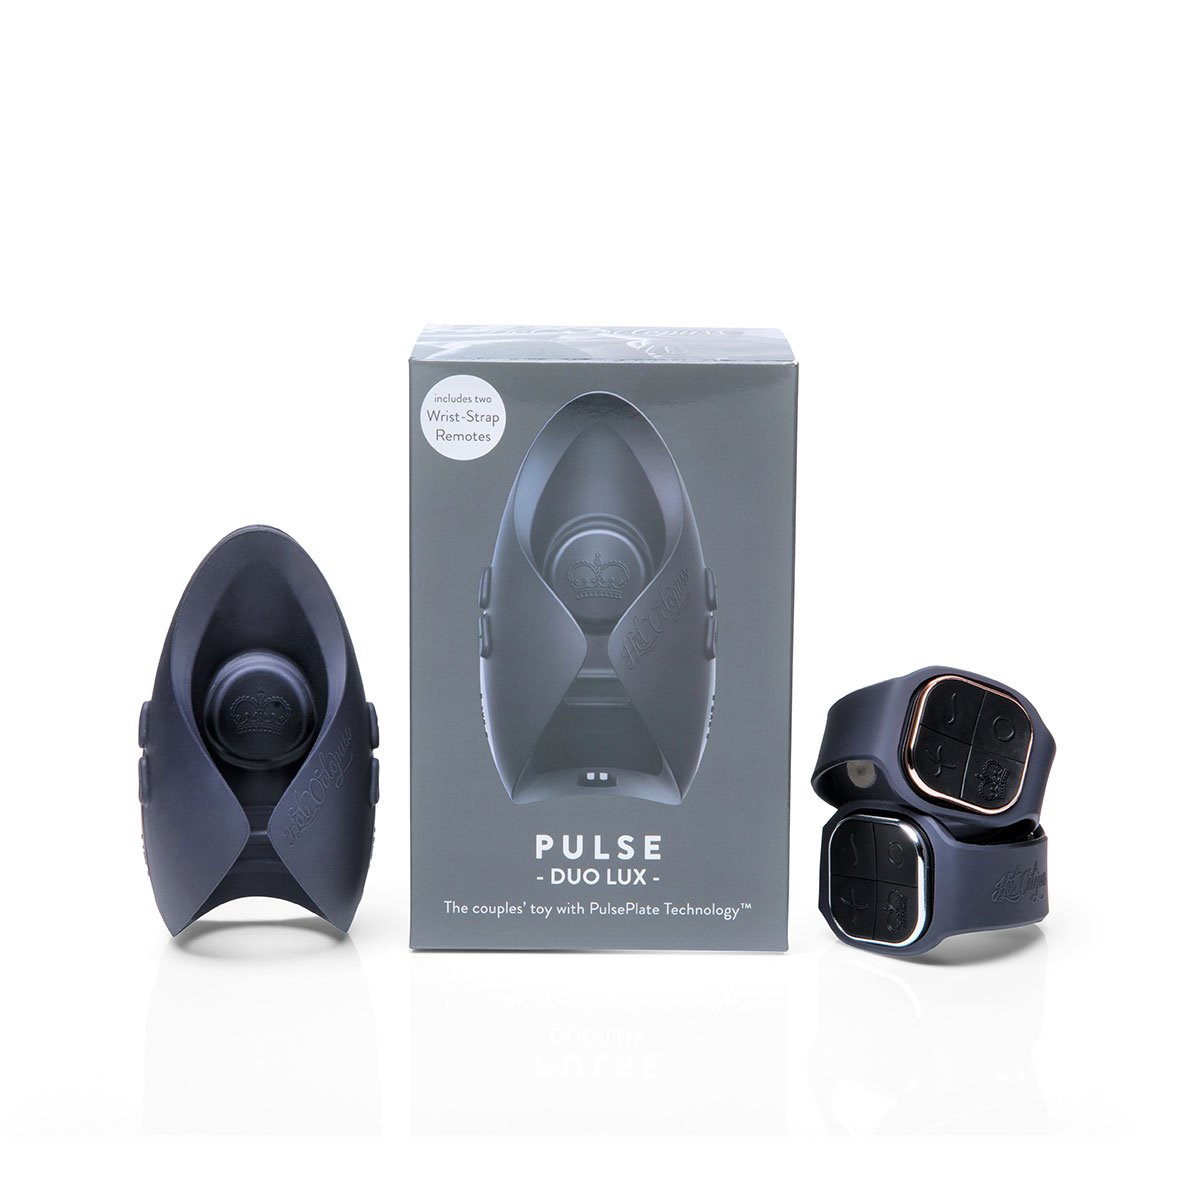 Hot Octopuss Pulse DUO LUX - Buy At Luxury Toy X - Free 3-Day Shipping